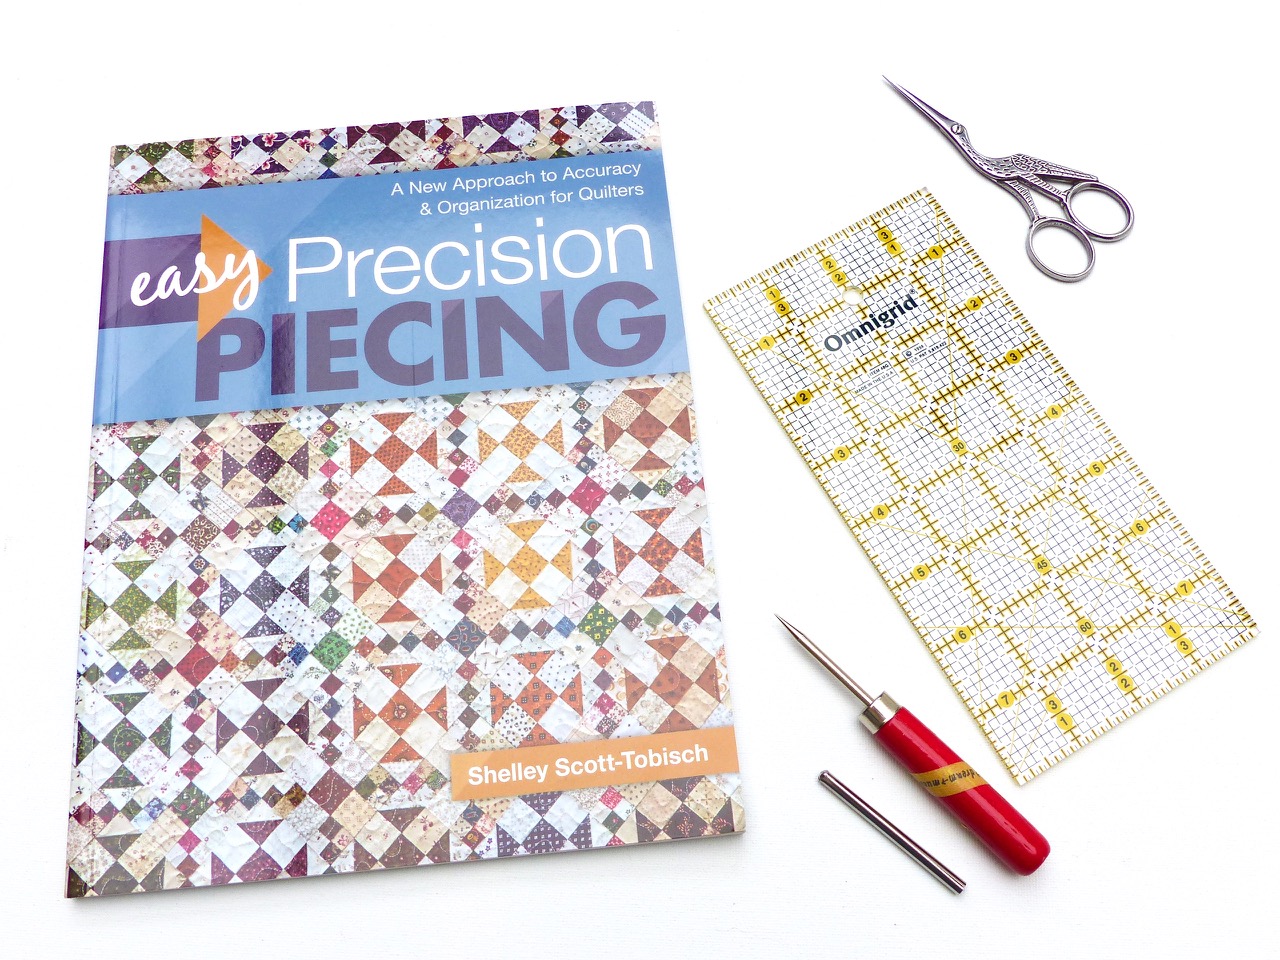 Easy Precision Piecing A New Approach to Accuracy /& Organization for Quilters